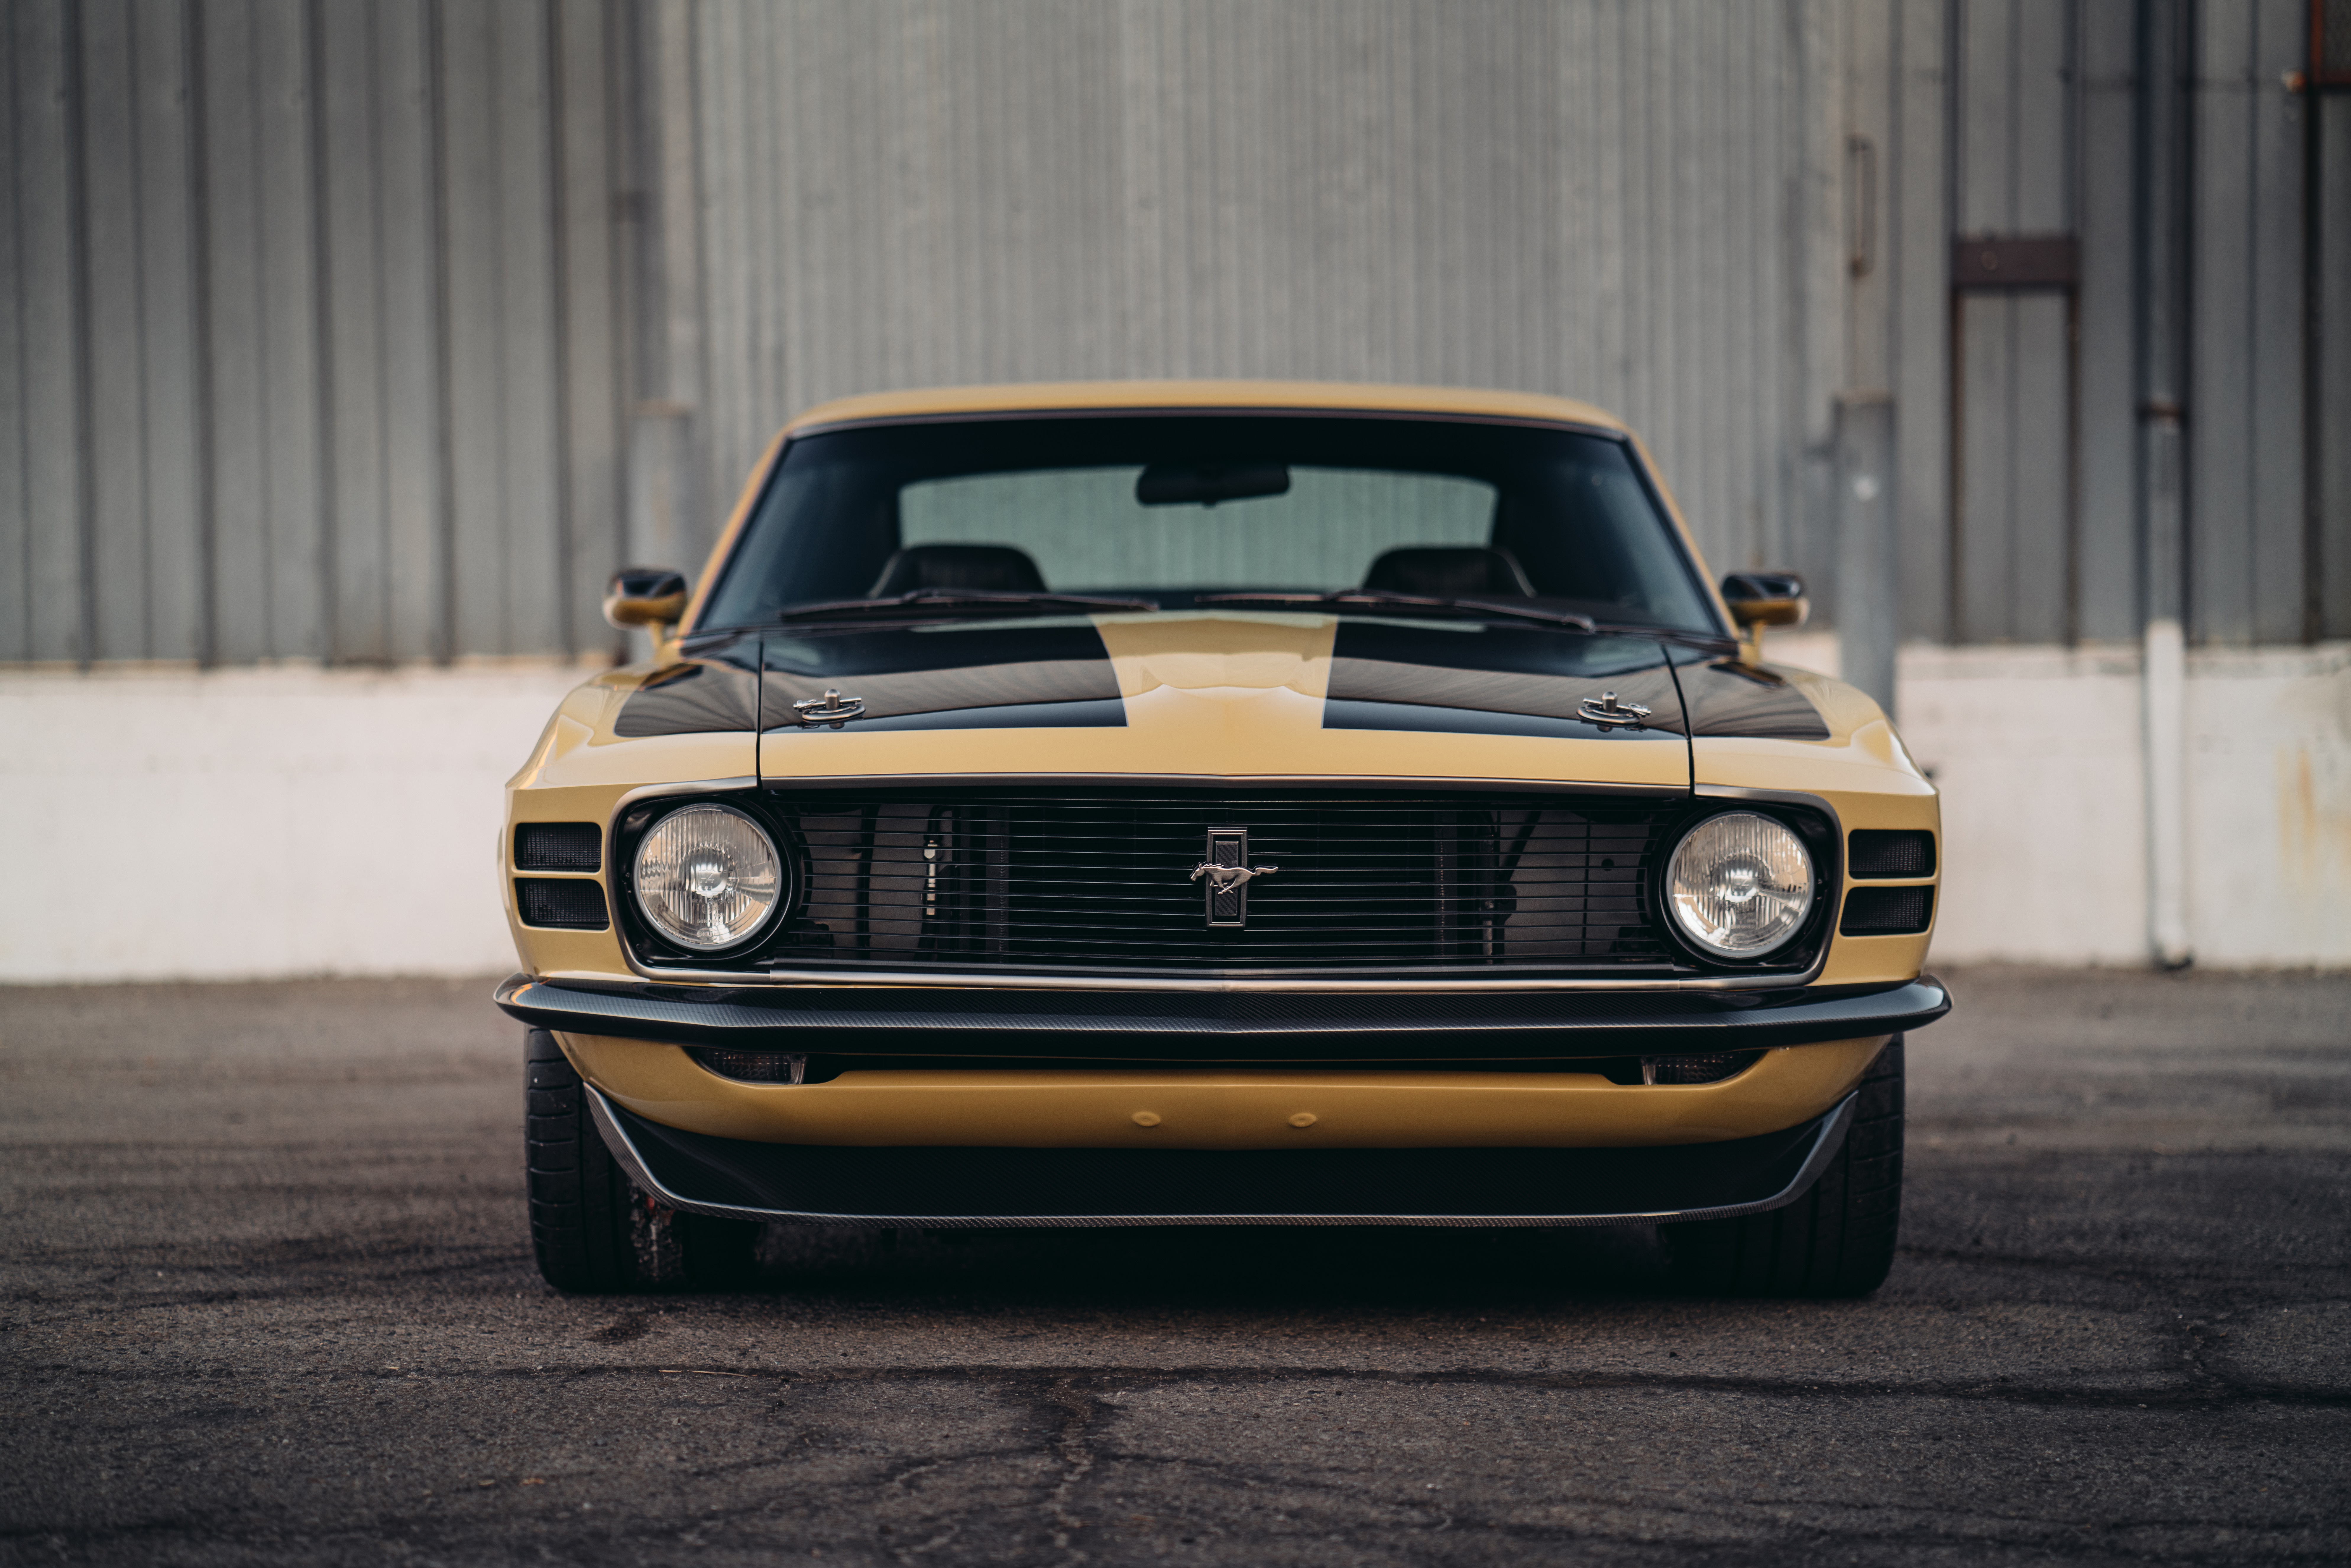 Car Ford Ford Mustang Ford Mustang Boss 302 Muscle Car Vehicle Yellow Car 7952x5304